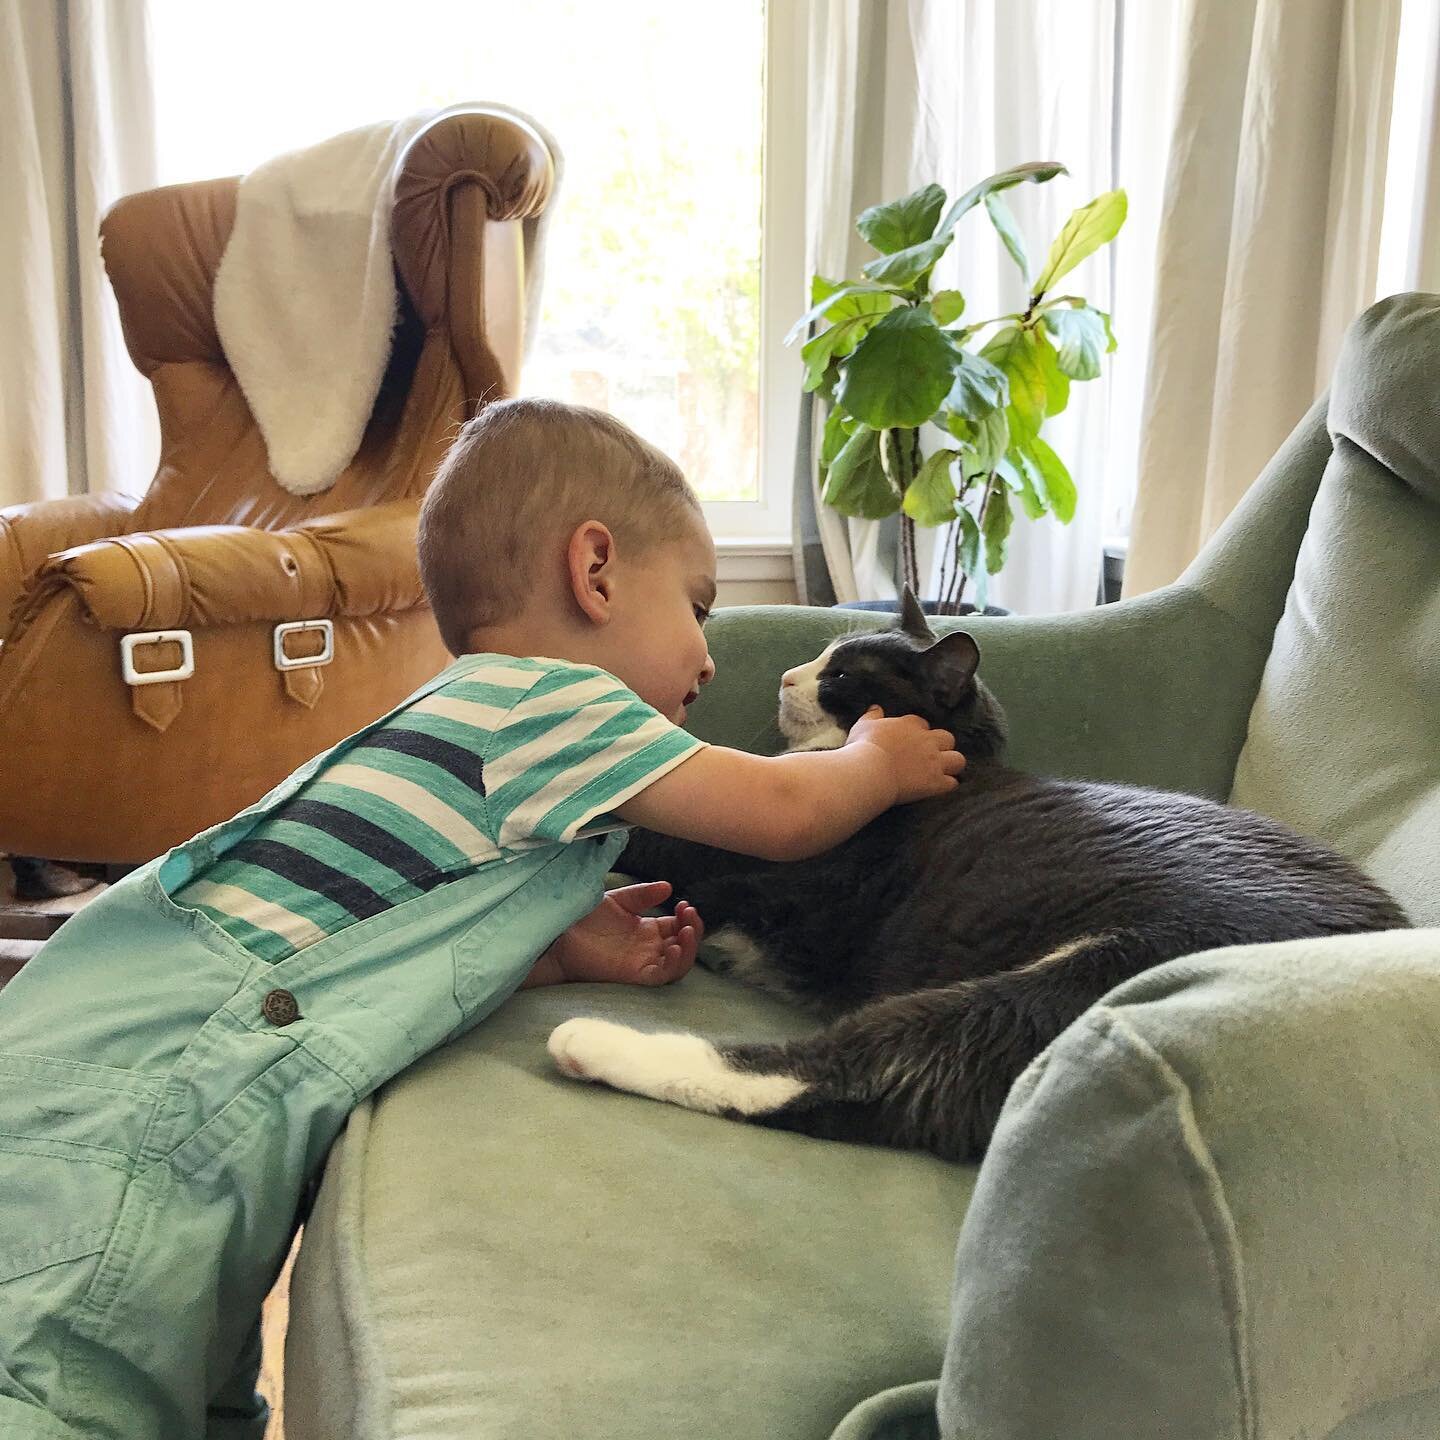 I just found out it&rsquo;s #NationalCatDay! Axel and Bryson have a special relationship. They cuddle often and Axel is always giving him kisses. Ax even has a cute nickname for Bryson &mdash; he calls him &ldquo;Beece,&rdquo; it&rsquo;s so cute. Axe